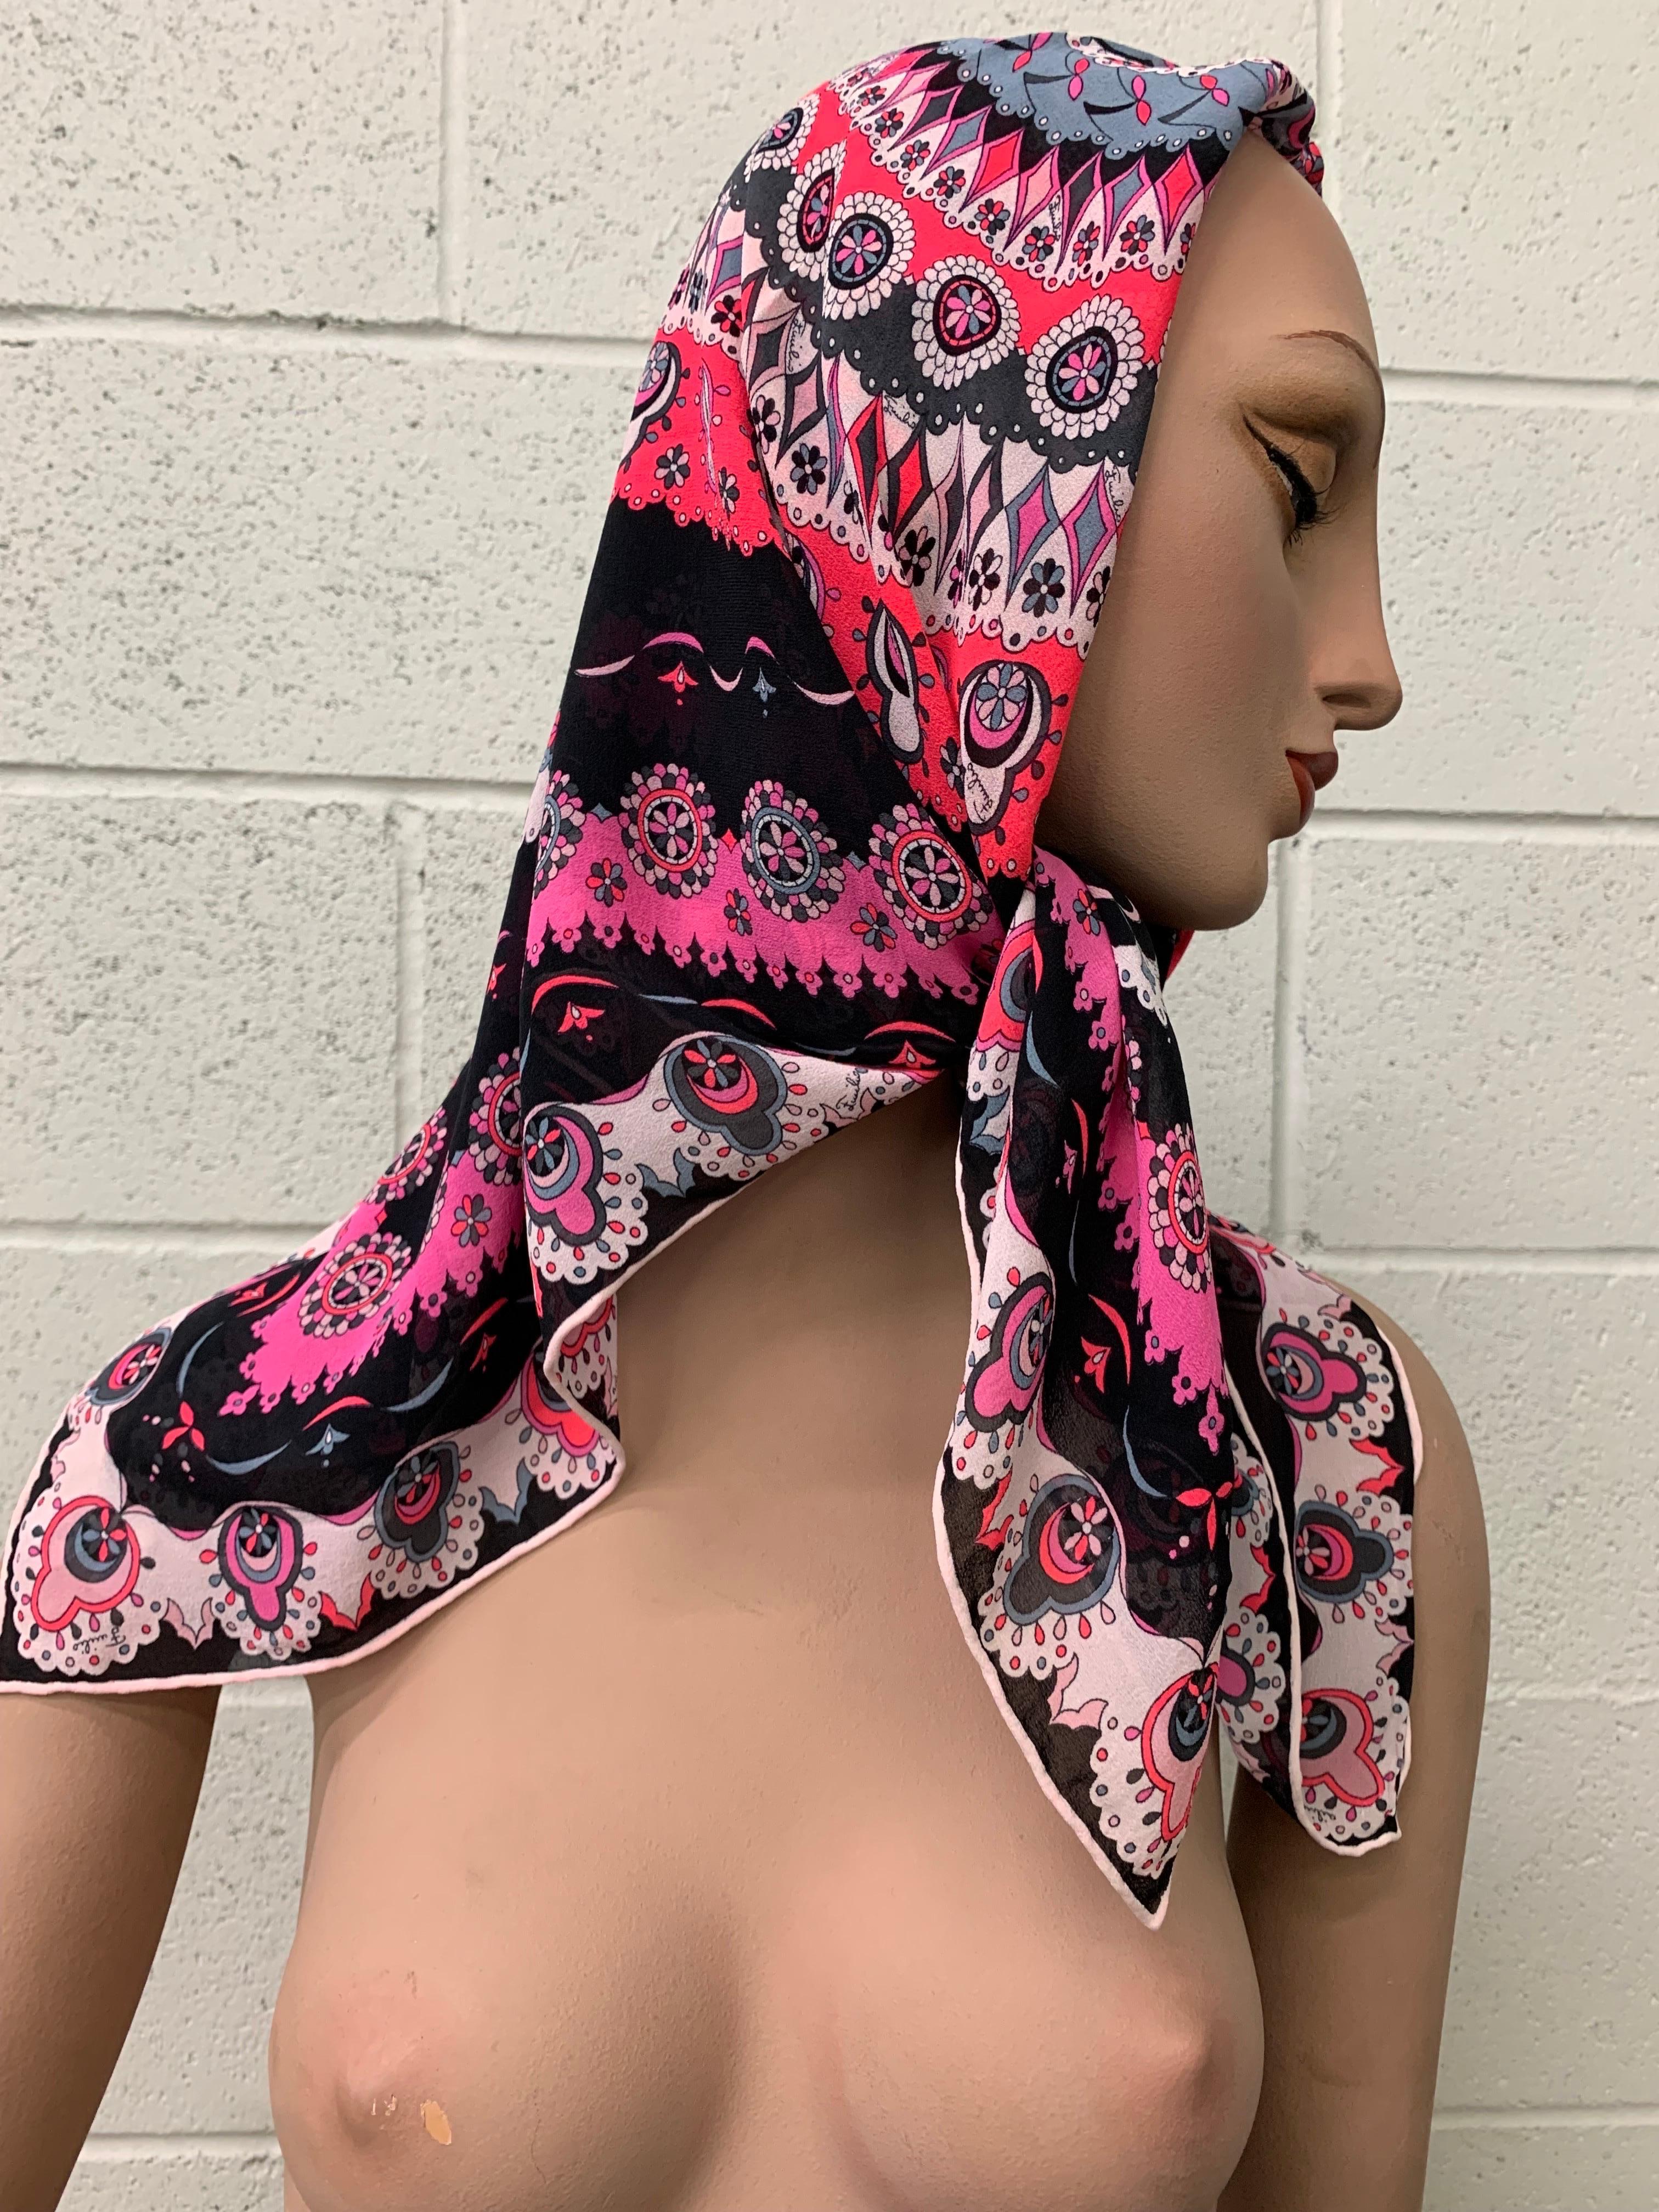 1960s Emilio Pucci Silk Chiffon Mod Medallion Print Large Square Head Scarf:  Mod floral pattern in pink, gray, black and white with a hand rolled edge!  34